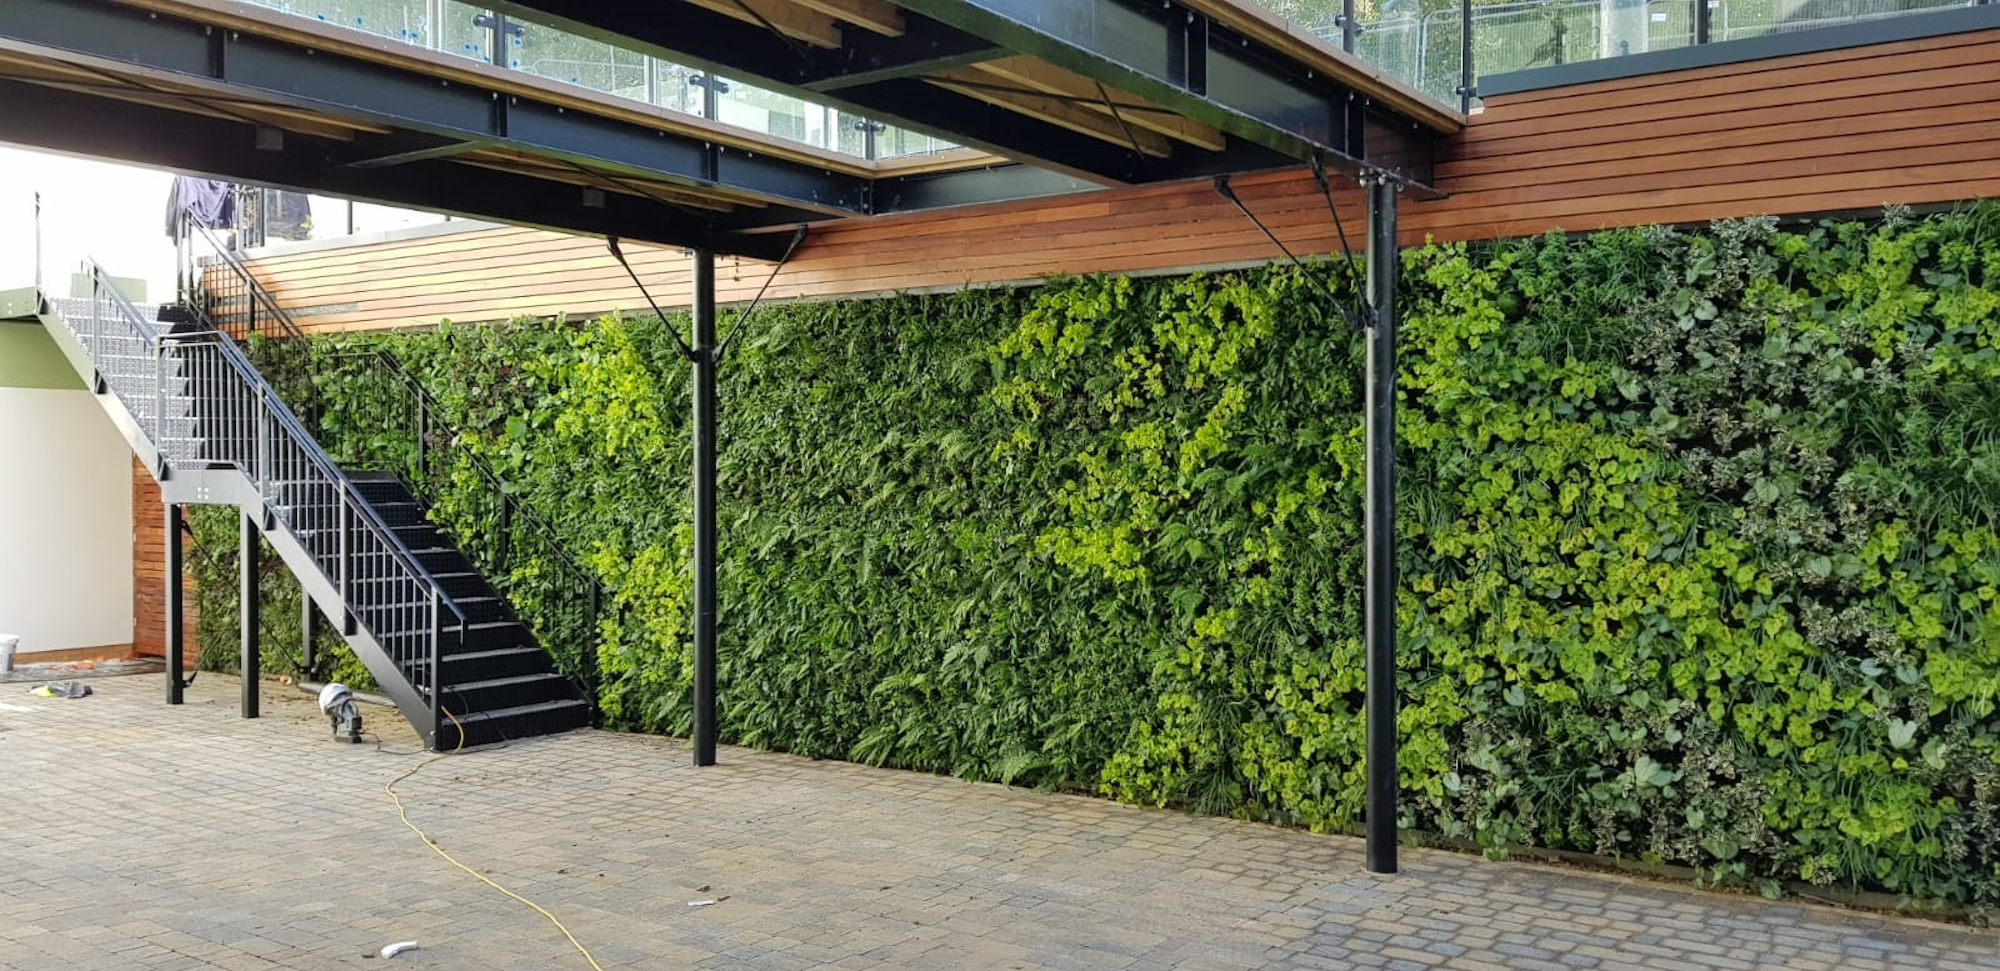 Living Wall in Courtyard with Staircase